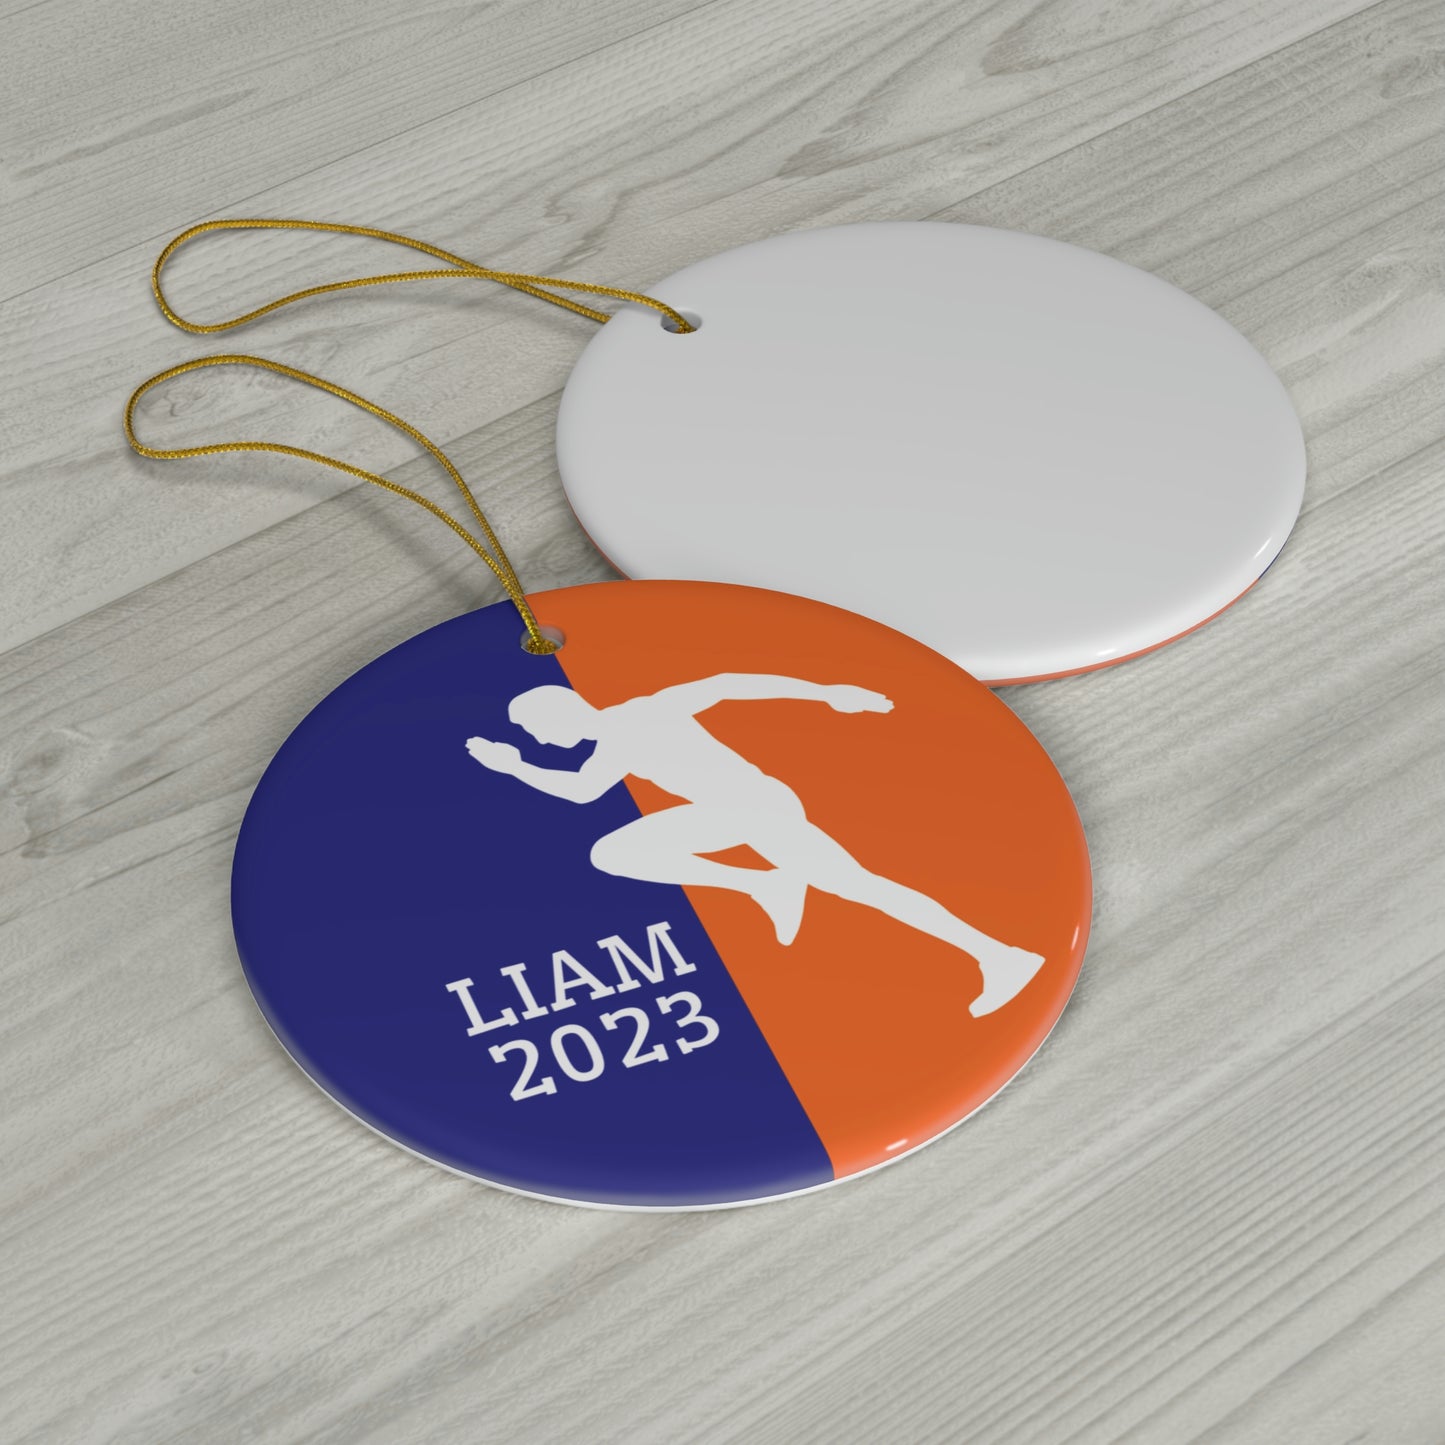 Runner Ornament, 2023 Personalized Runner Christmas Ornament, Ceramic Tree Ornament for Track and Field Players